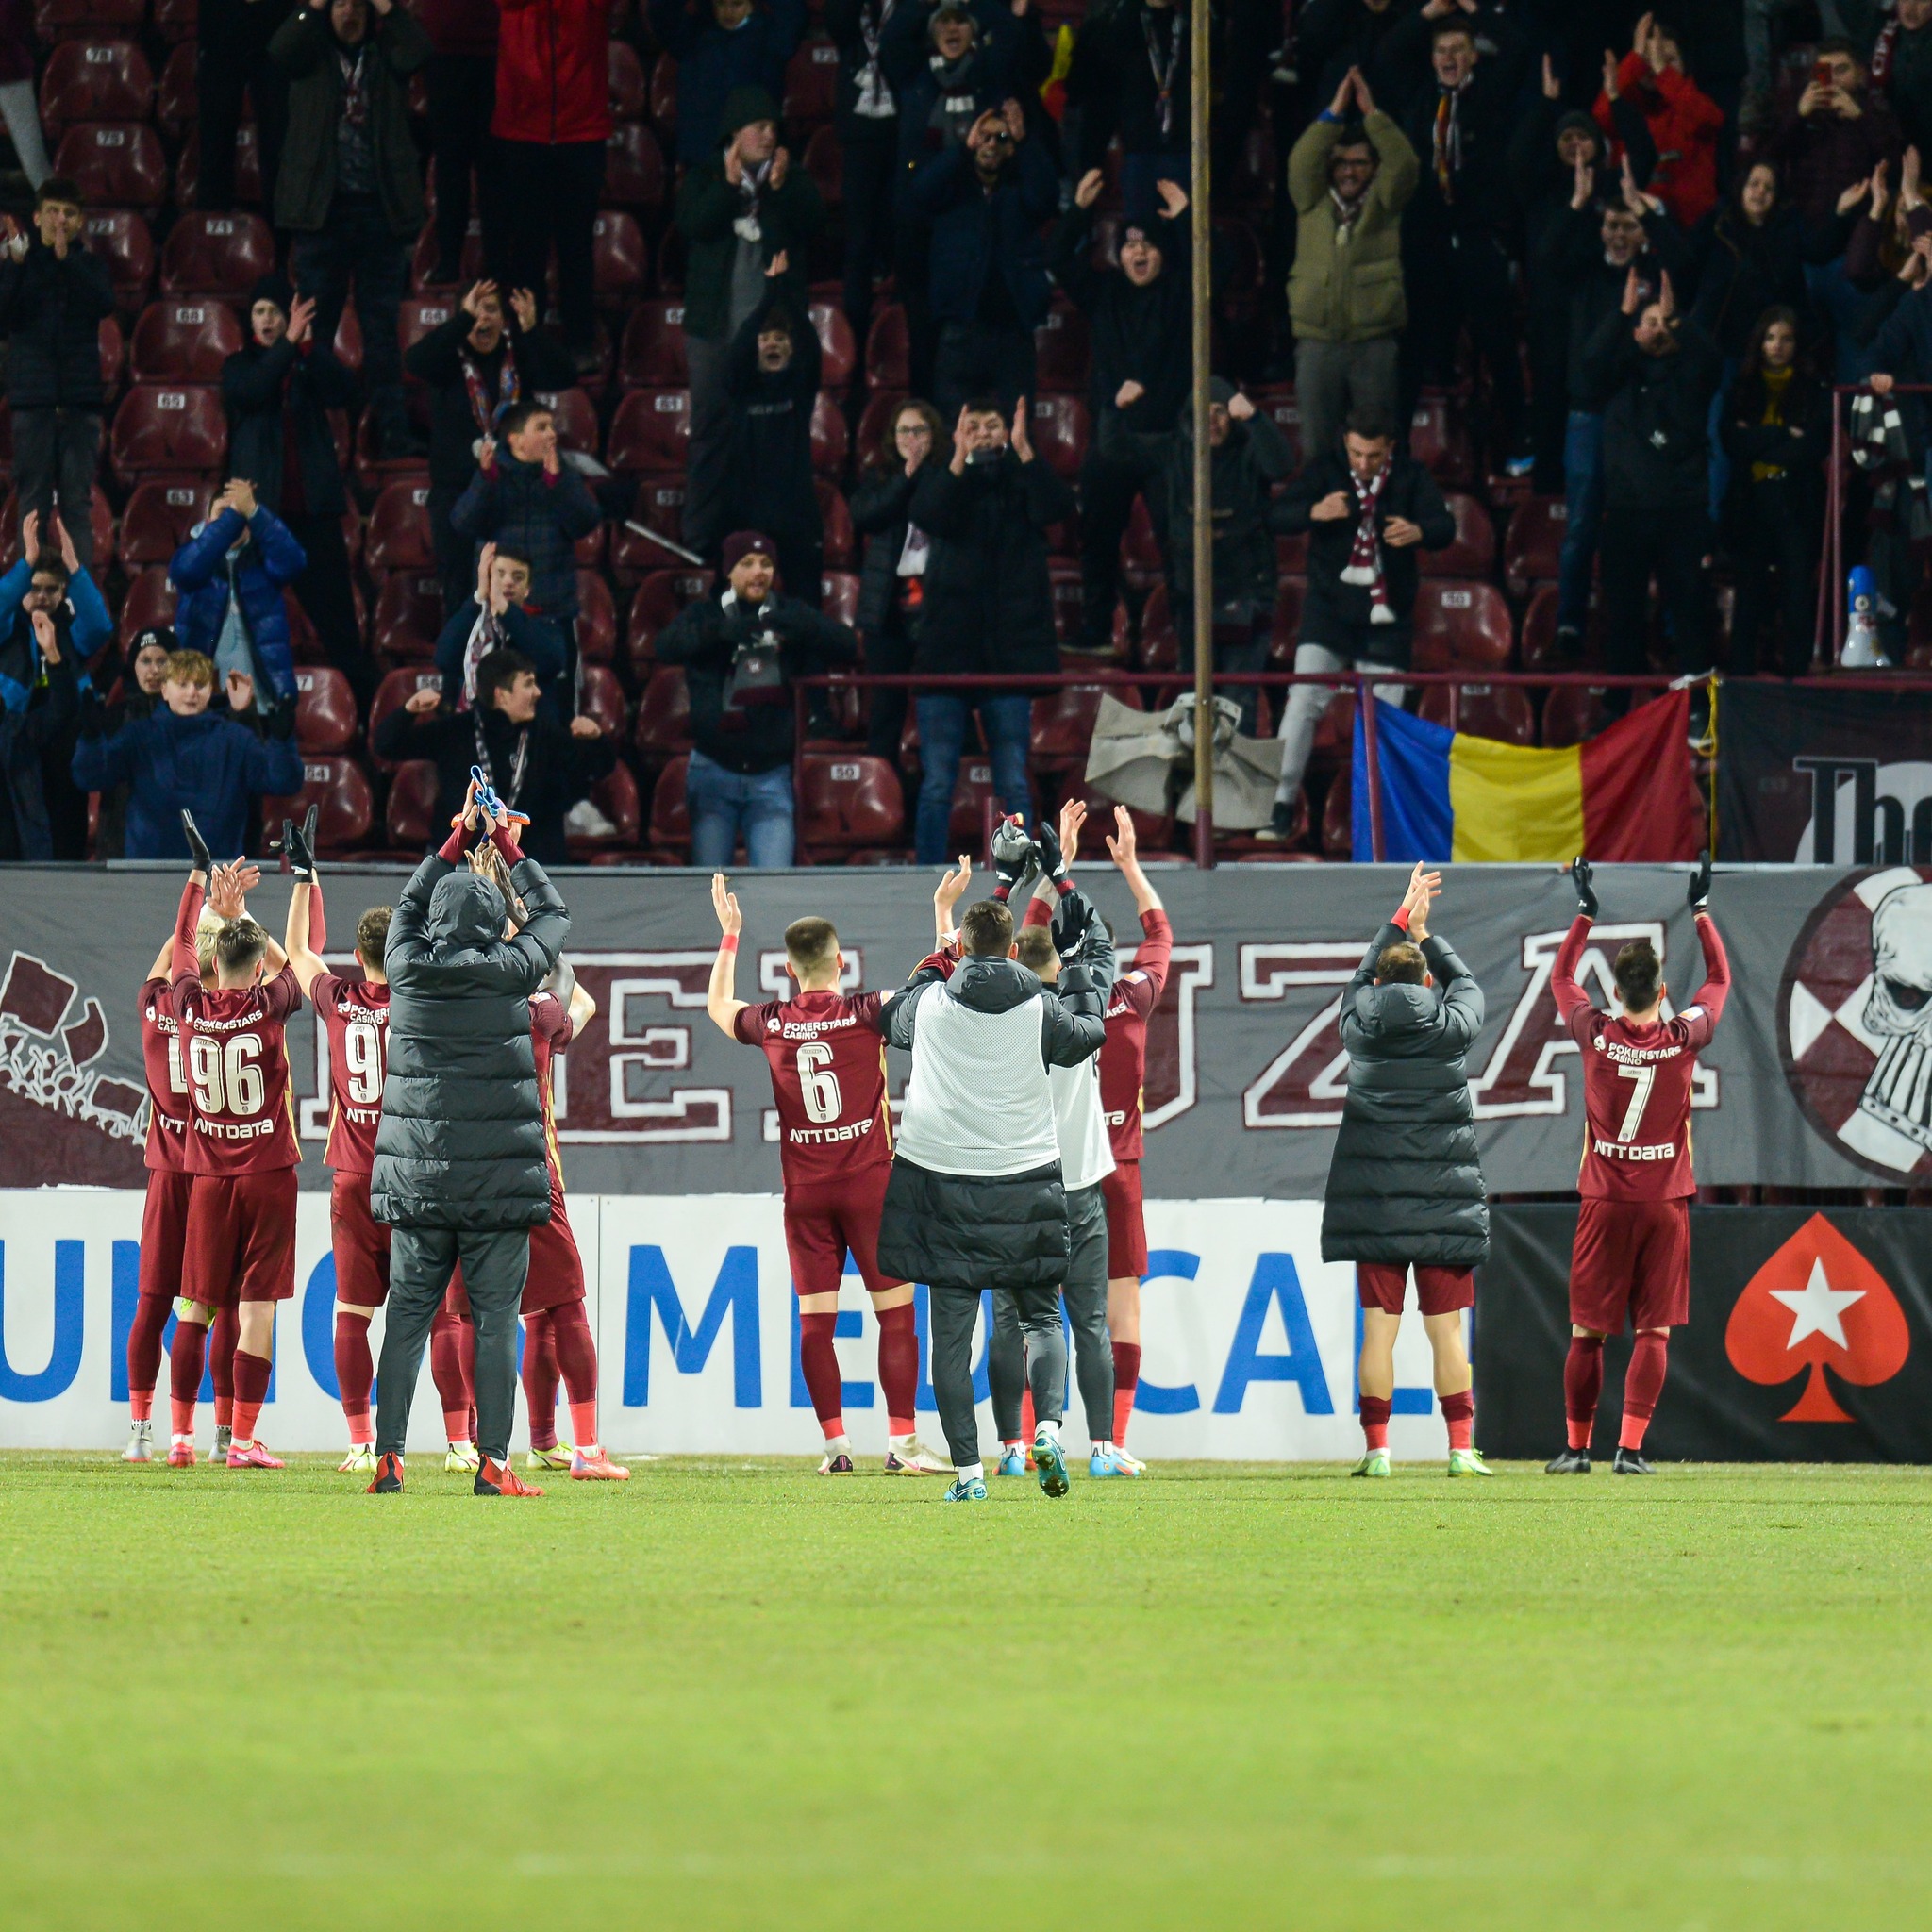 CFR Cluj – FCSB, sold out